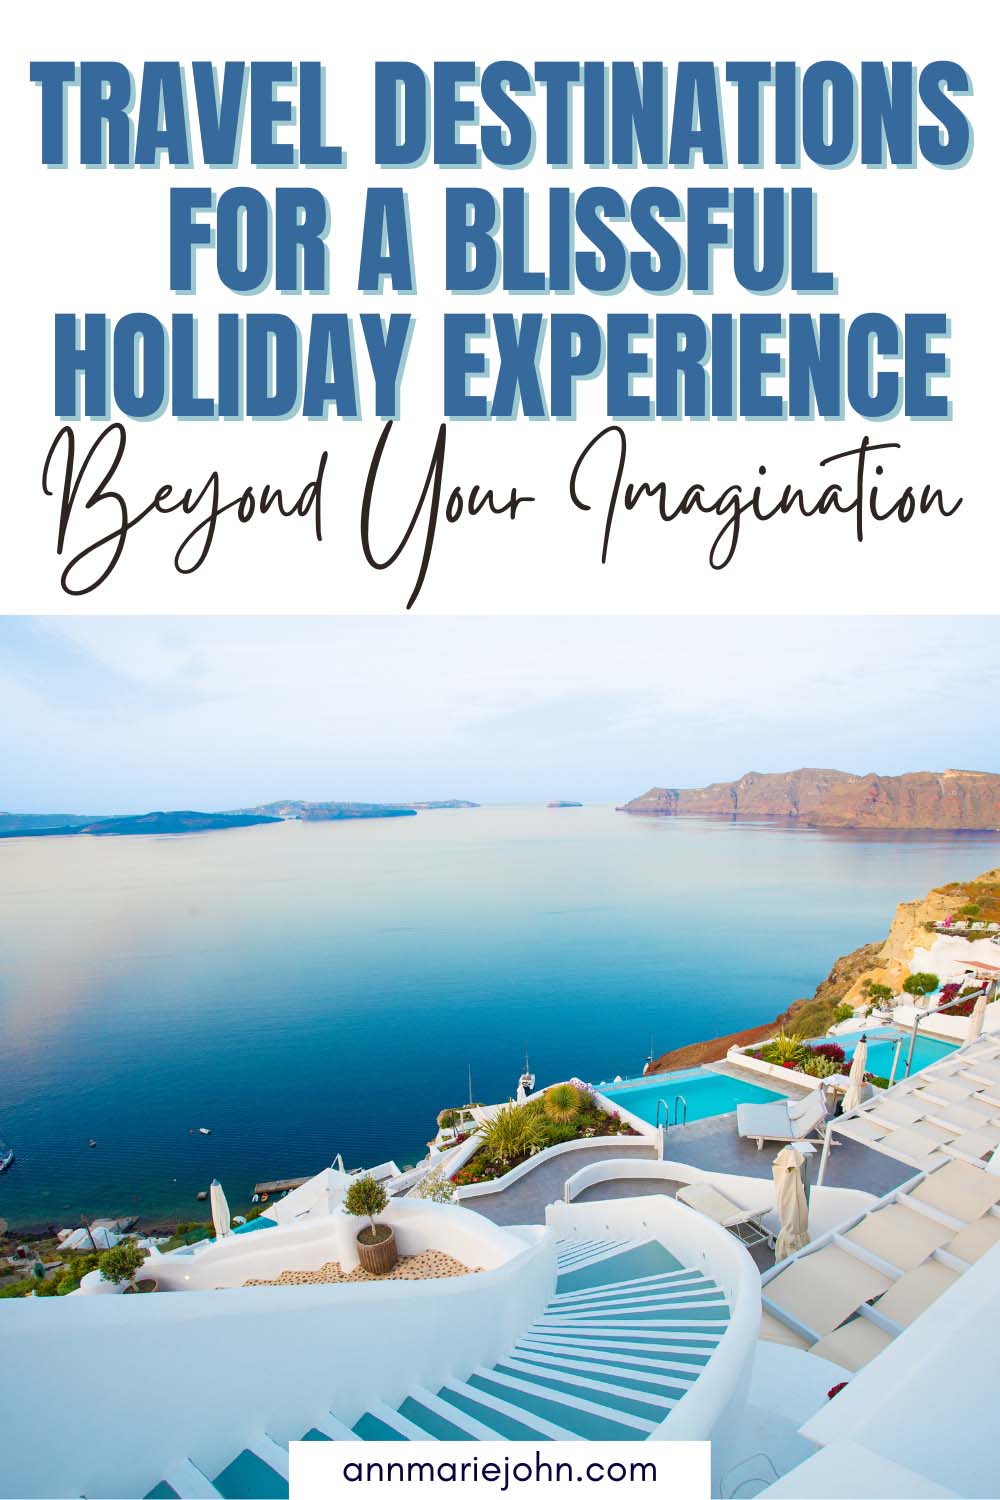 Travel Destinations for a Blissful Holiday Experience Beyond Your Imagination